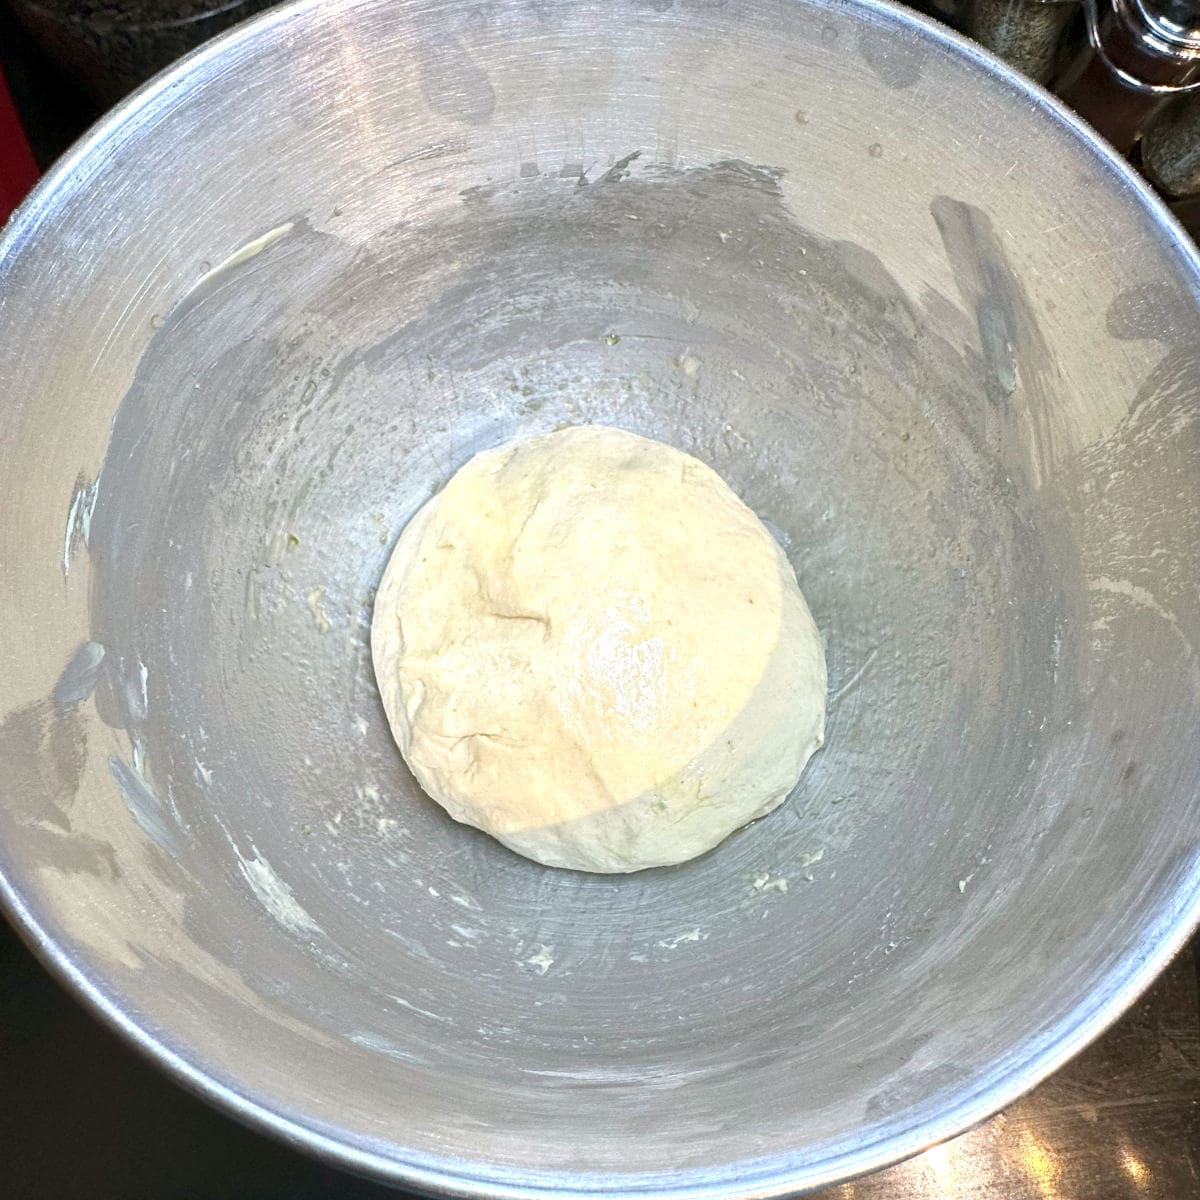 Vegan chocolate babka dough after kneading, formed into a ball, in stand mixer bowl.